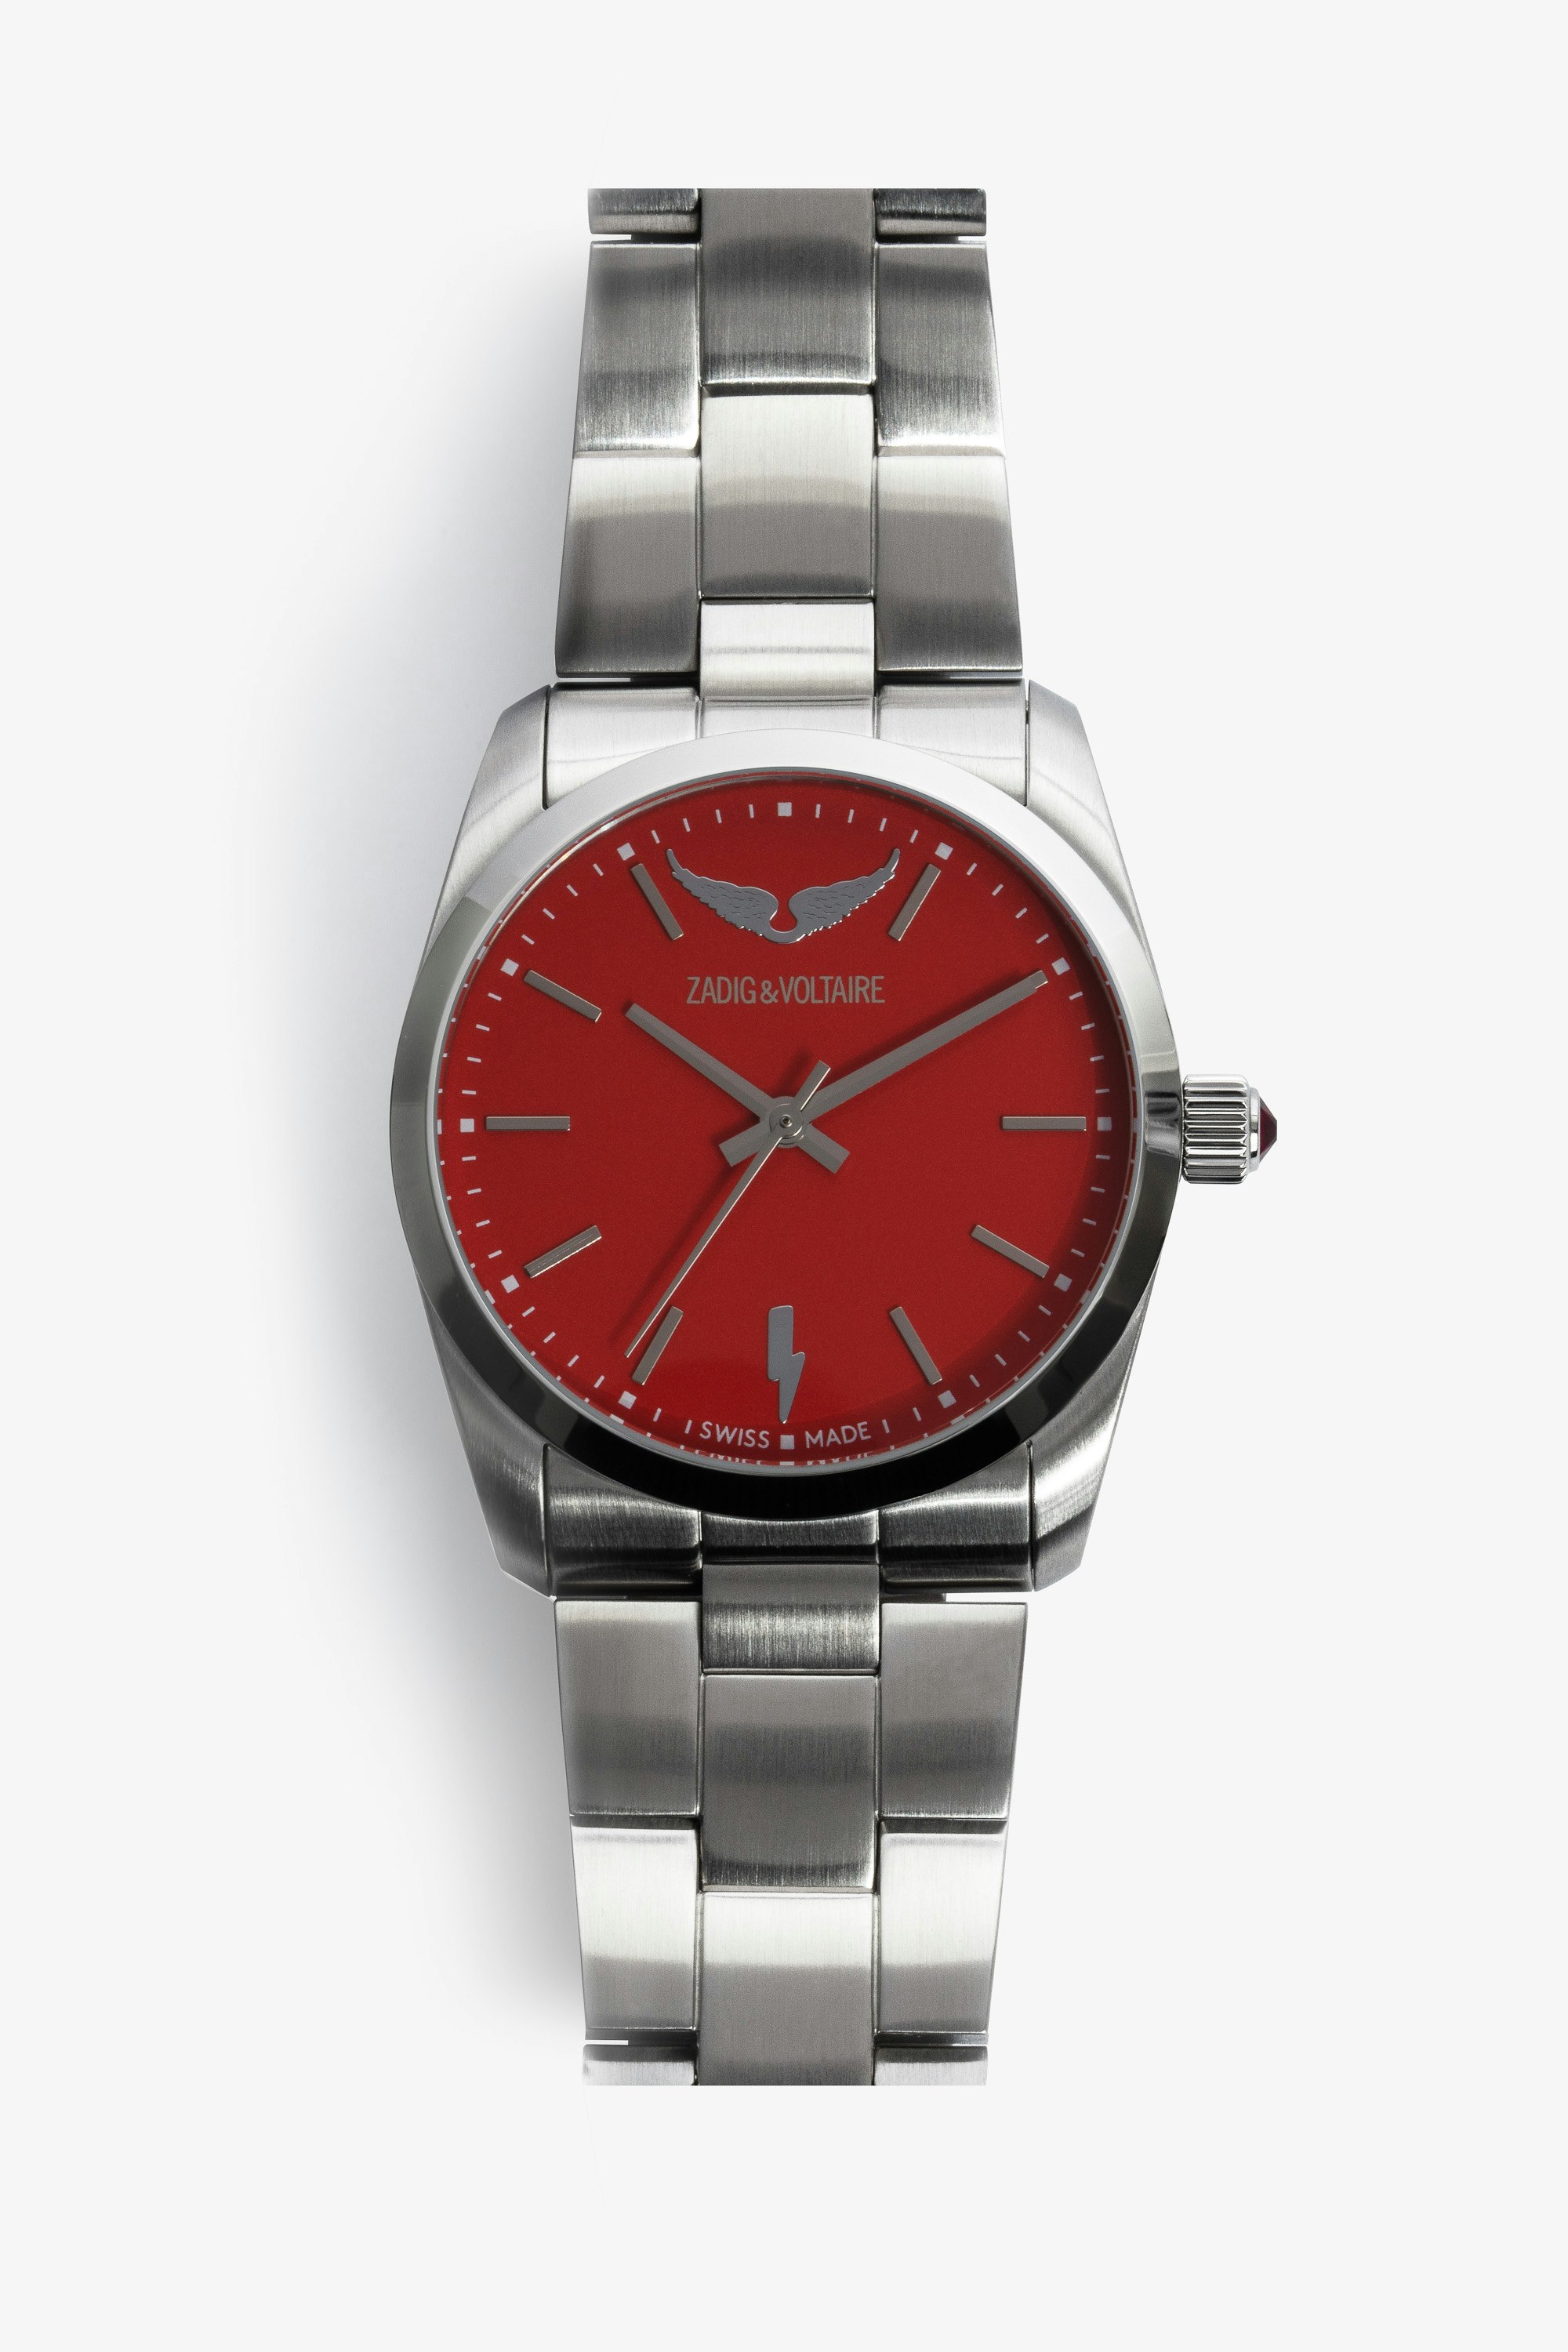 Time2Love Watch - Women's stainless steel watch with matte red face